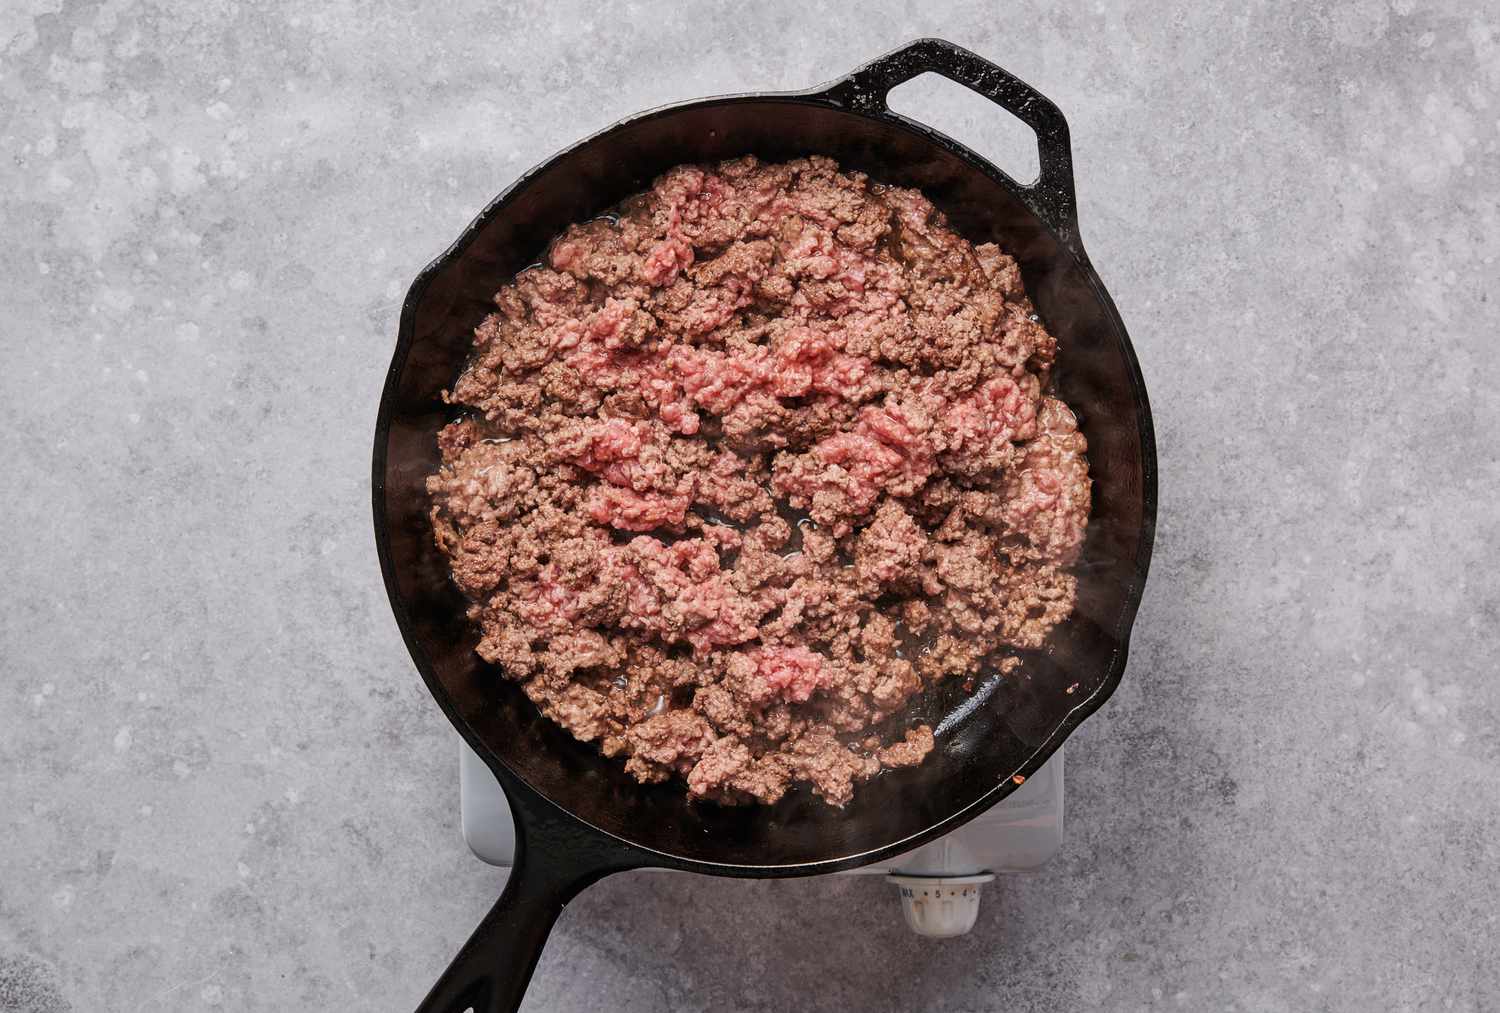 A large skillet of ground beef